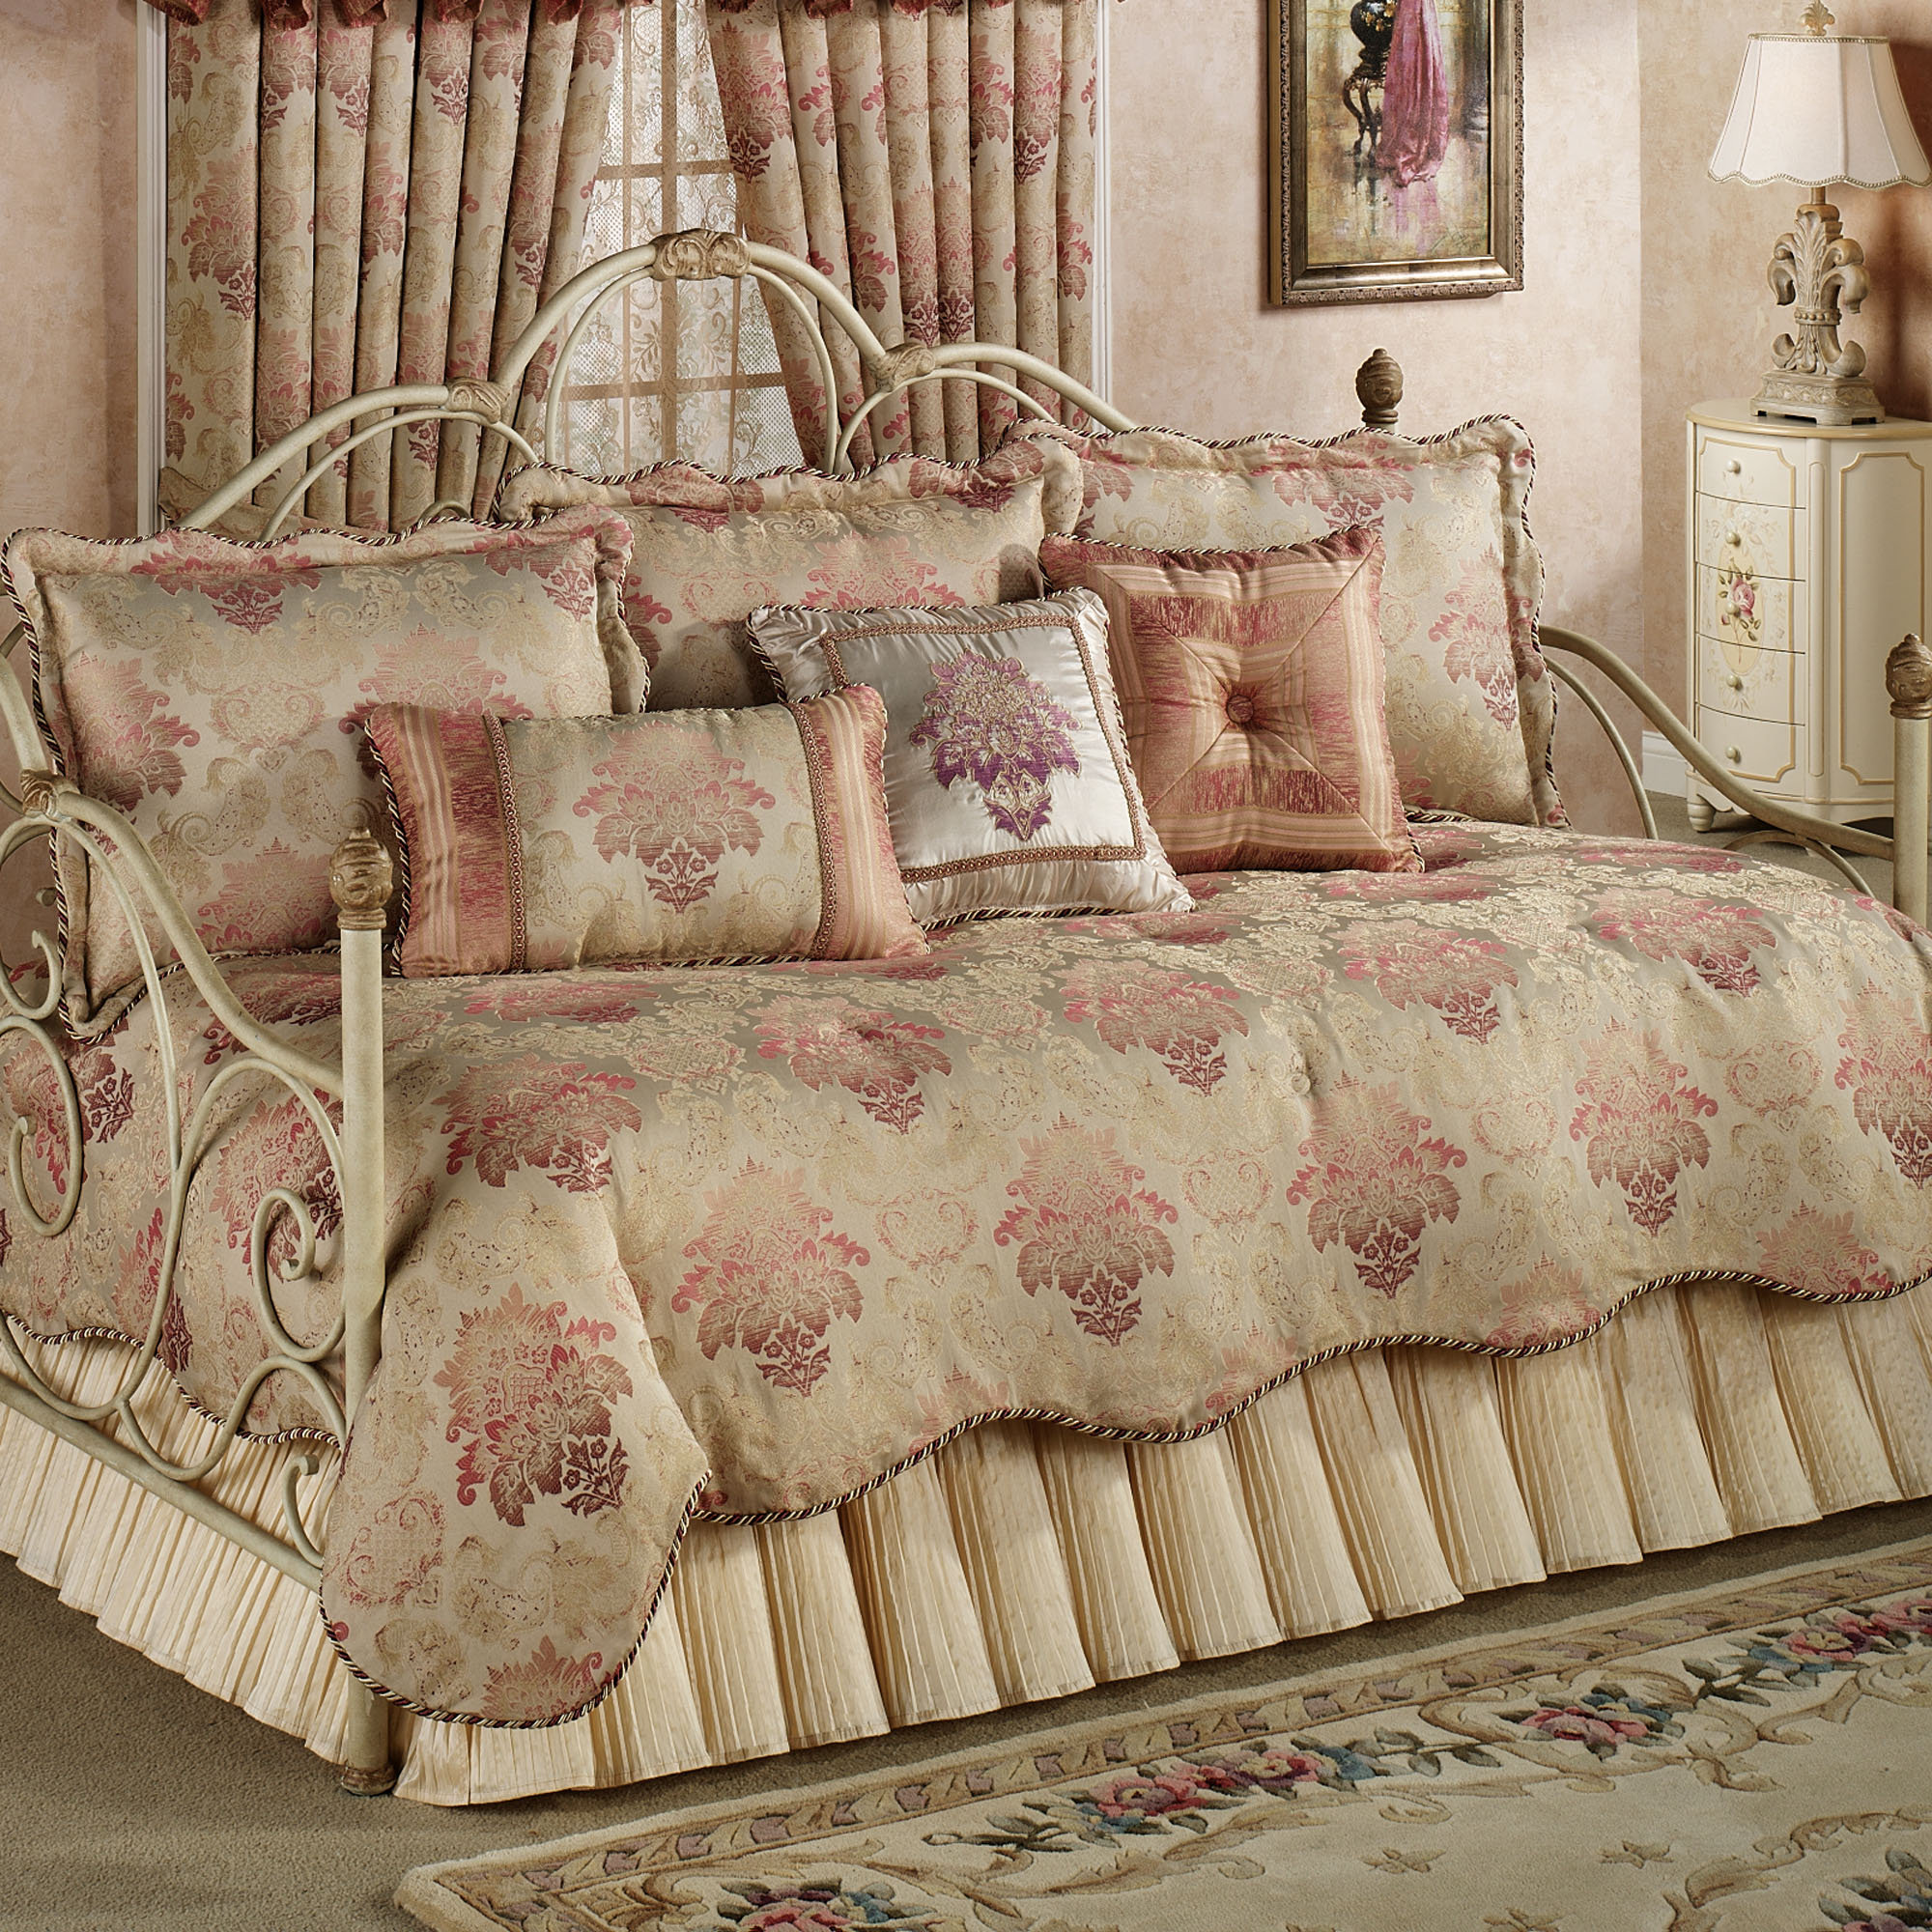 Daybed bedding sets clearance – 20 attributions to the realisation of the many benefits